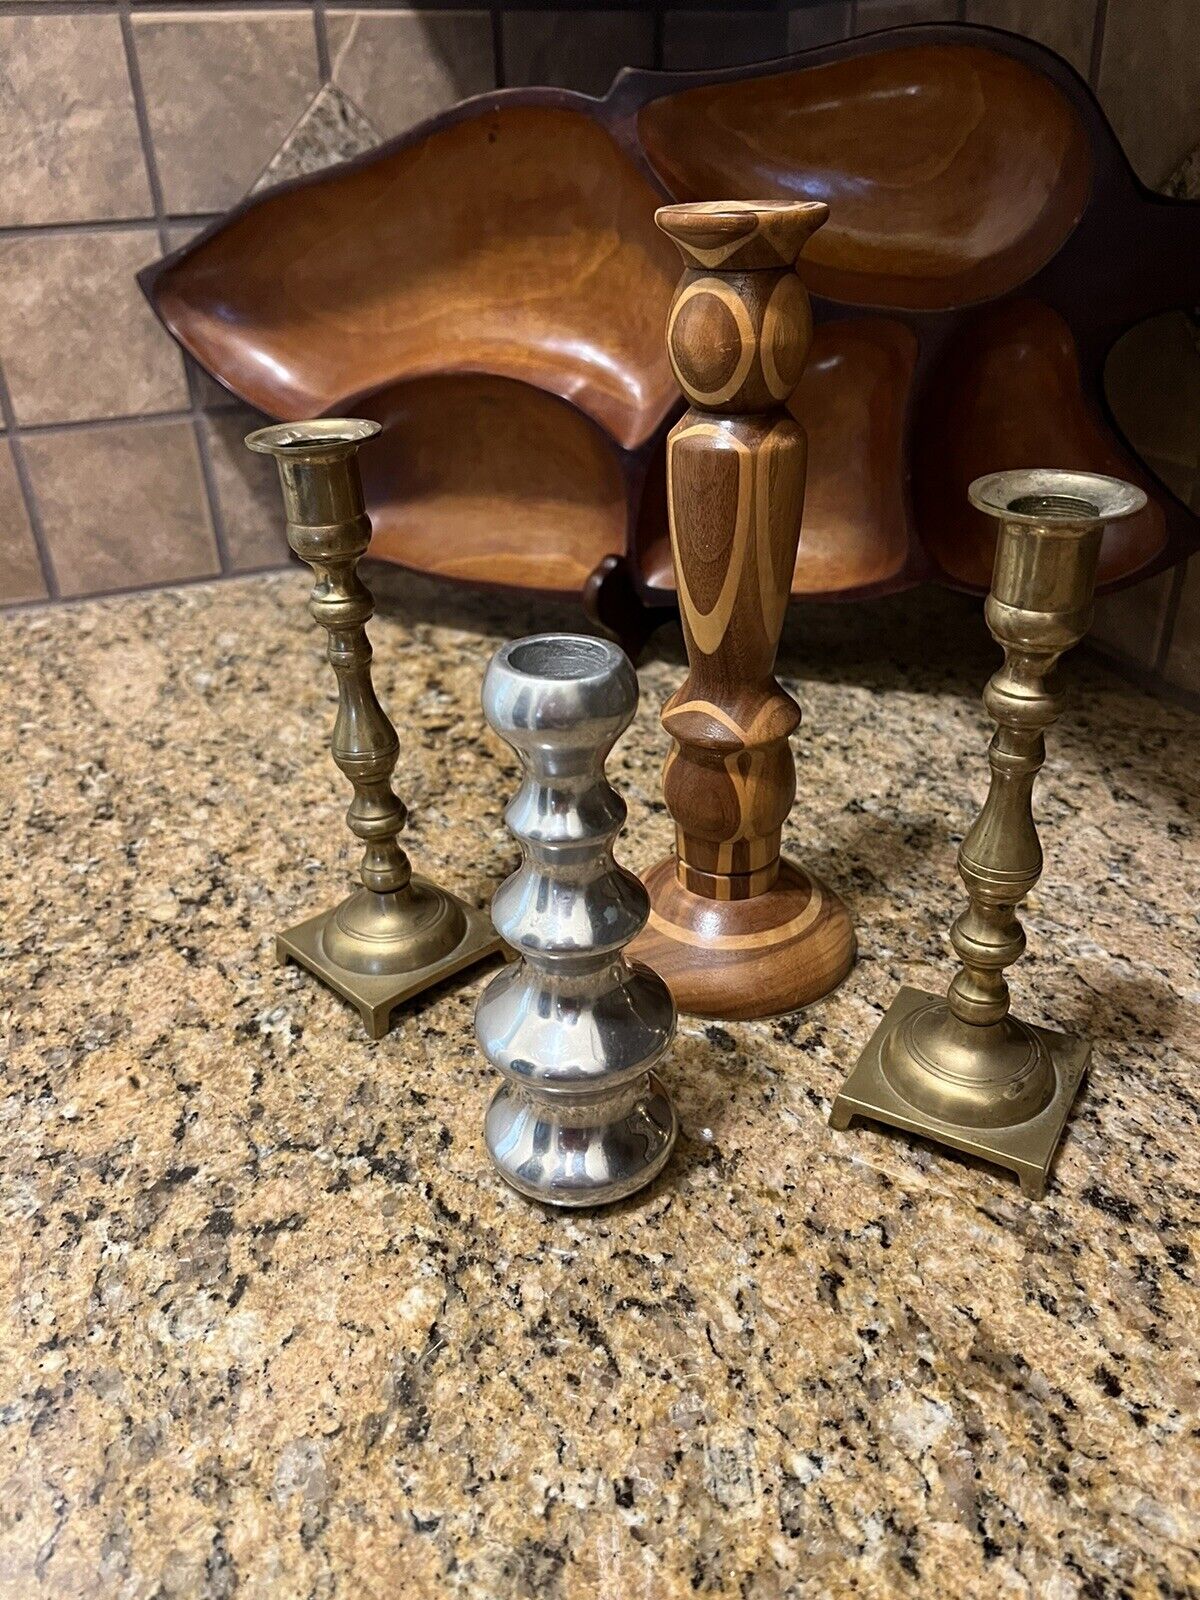 Set of 4 Cute Mix Candlesticks Holders brass, wood, pewter decor good condition